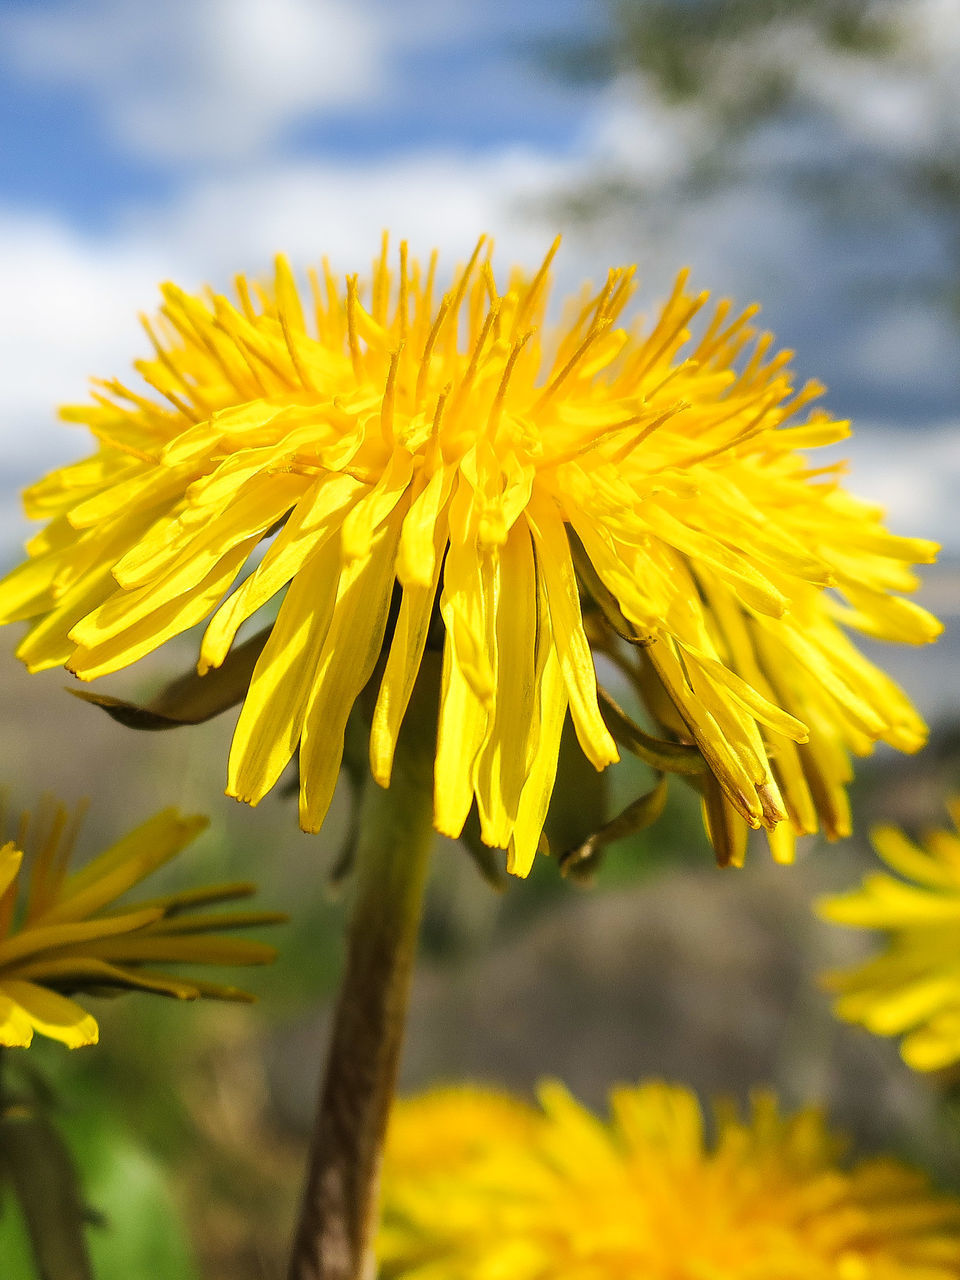 flower, yellow, freshness, petal, fragility, flower head, growth, beauty in nature, focus on foreground, close-up, nature, blooming, single flower, stem, pollen, plant, in bloom, blossom, outdoors, dandelion